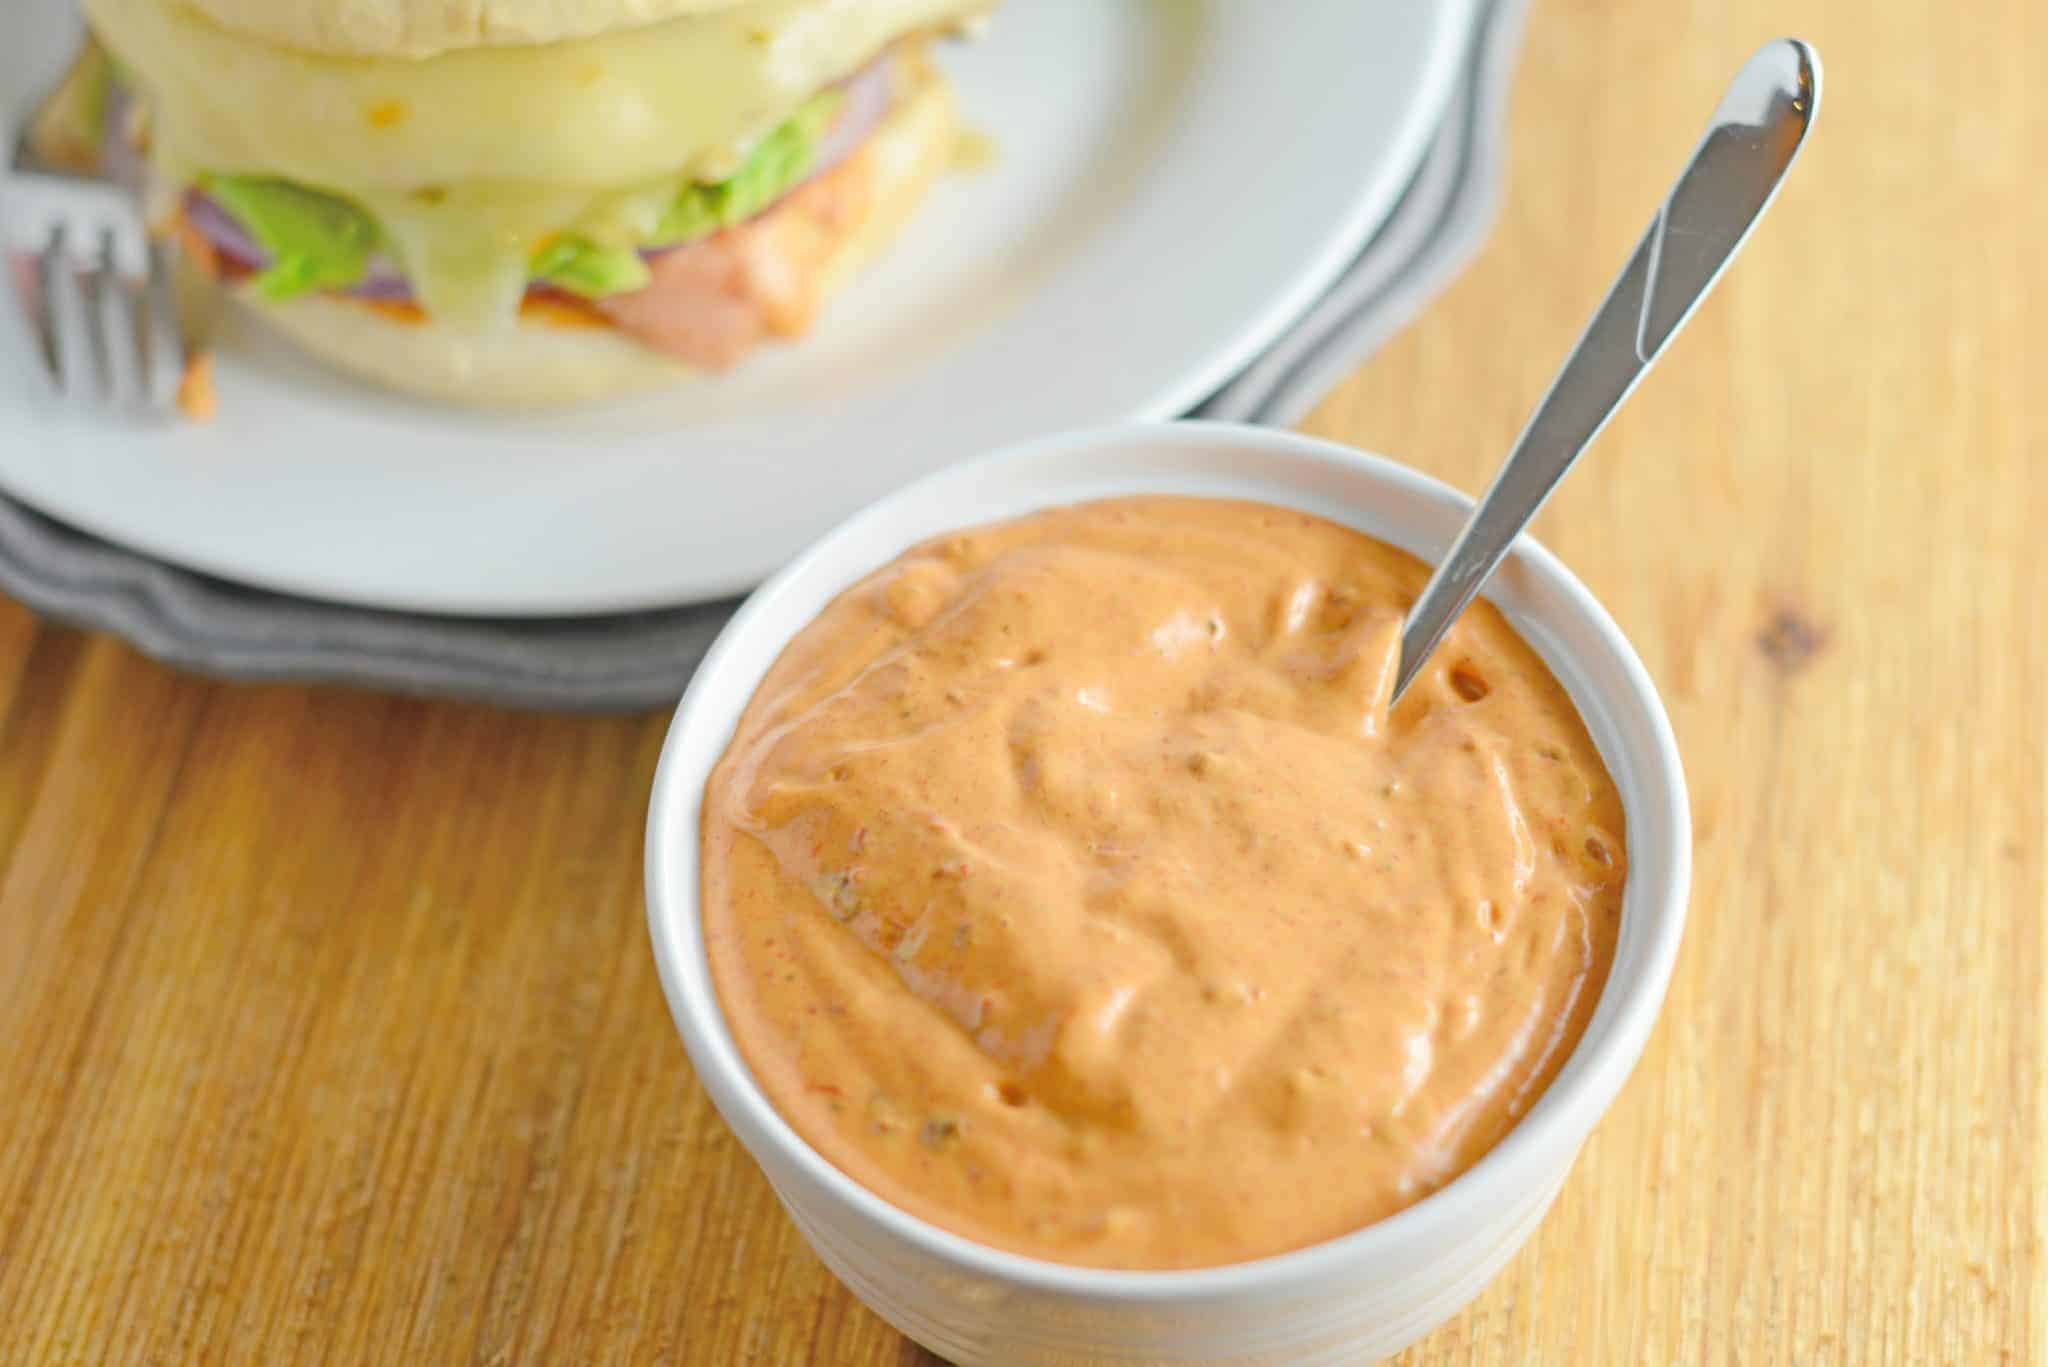 Creamy Chipotle Aioli is a quick and zesty sauce perfect for dipping or spreading on sandwiches.